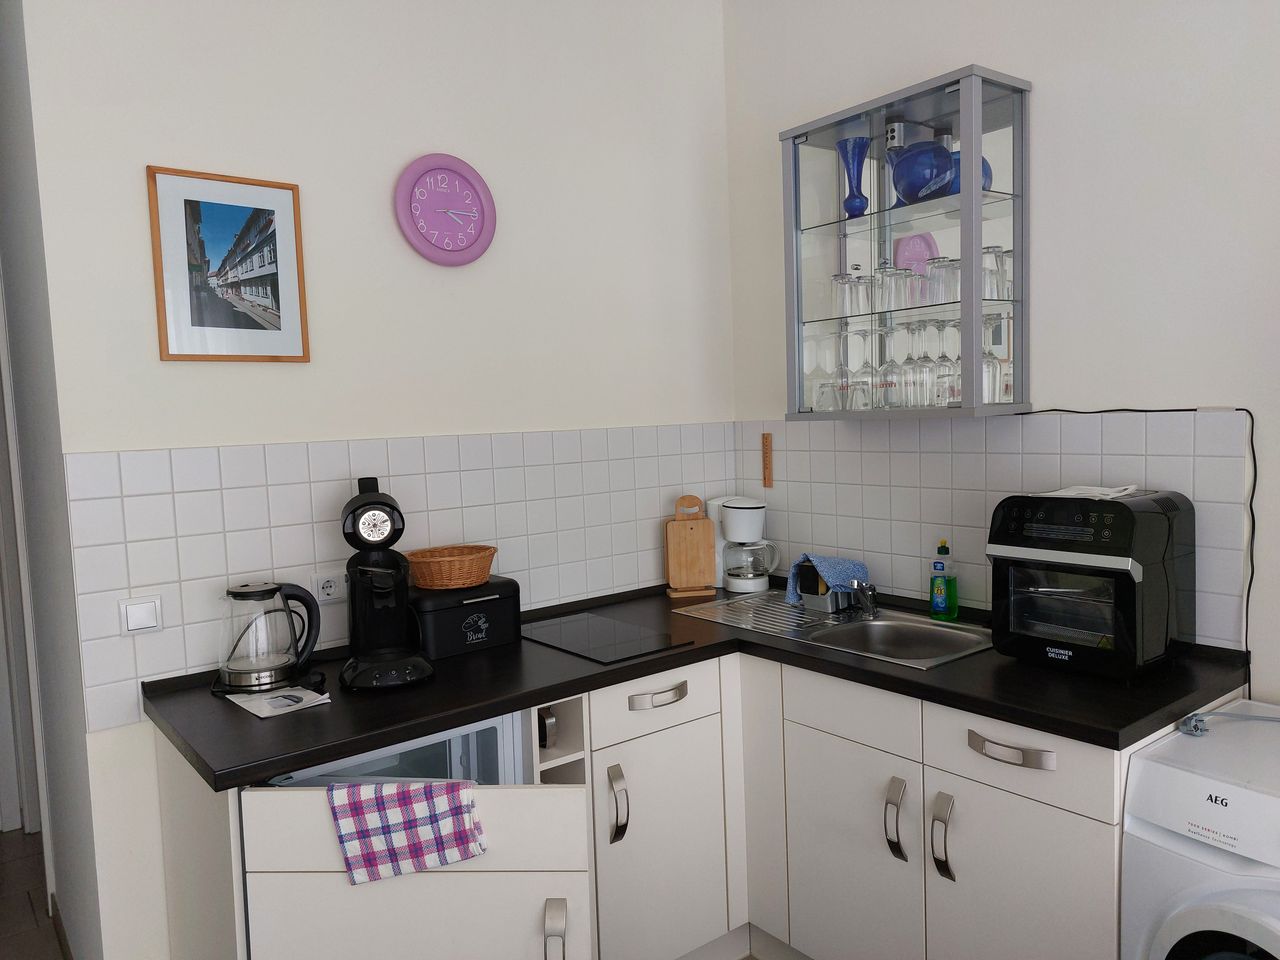 Homely & cosy flat in the old town with underground parking, Erfurt